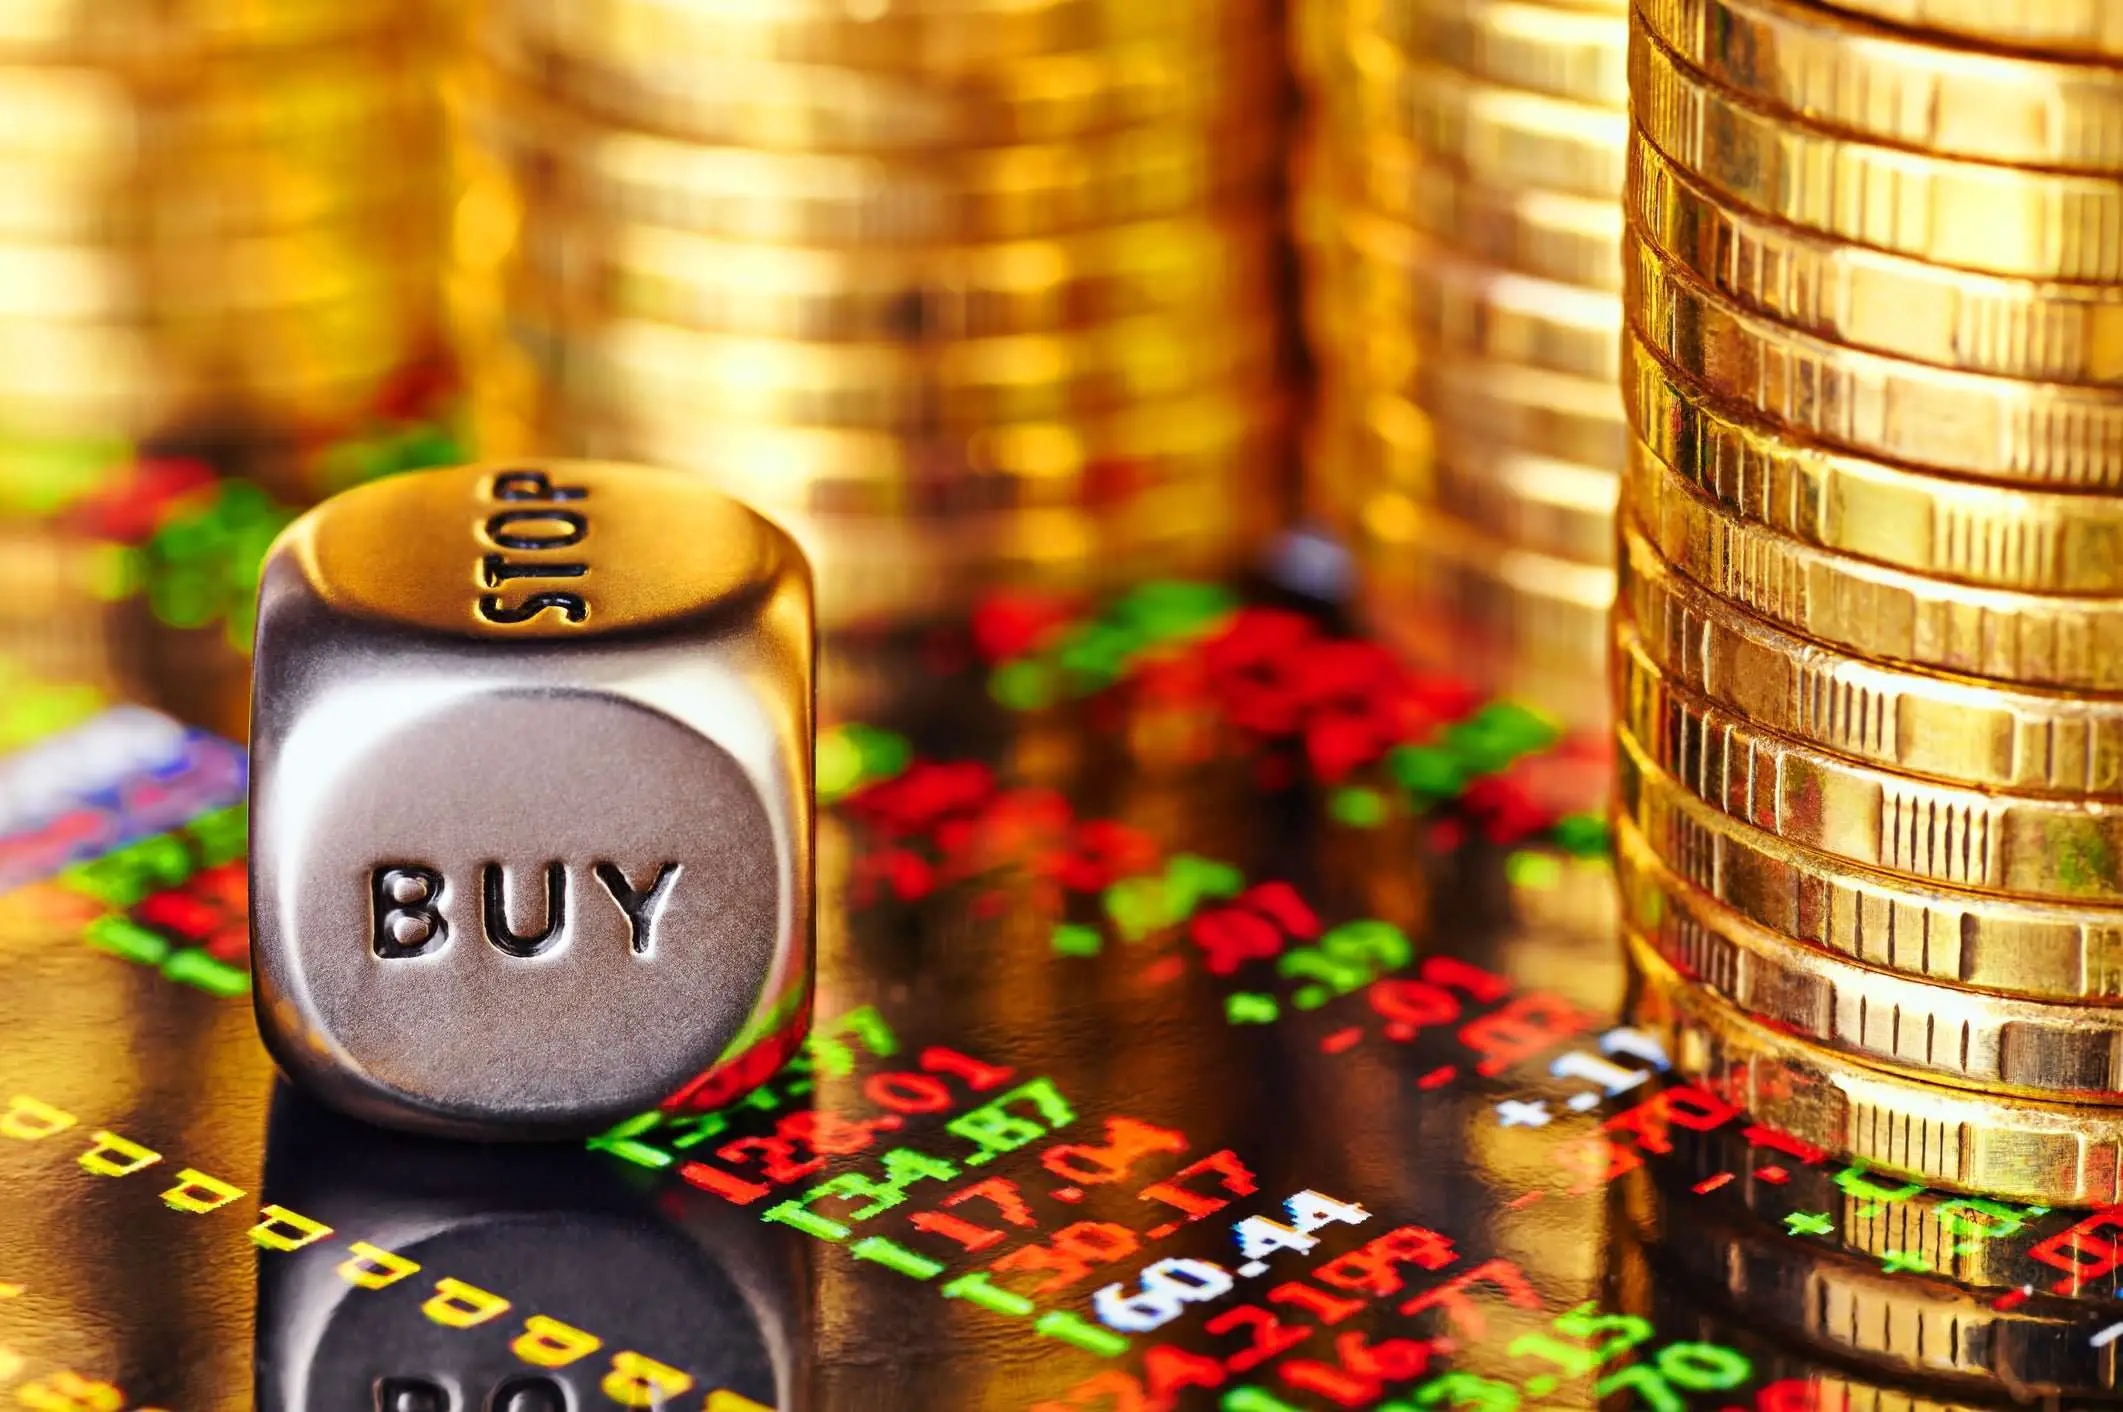 3 Top Gold Stocks to Buy in 2019